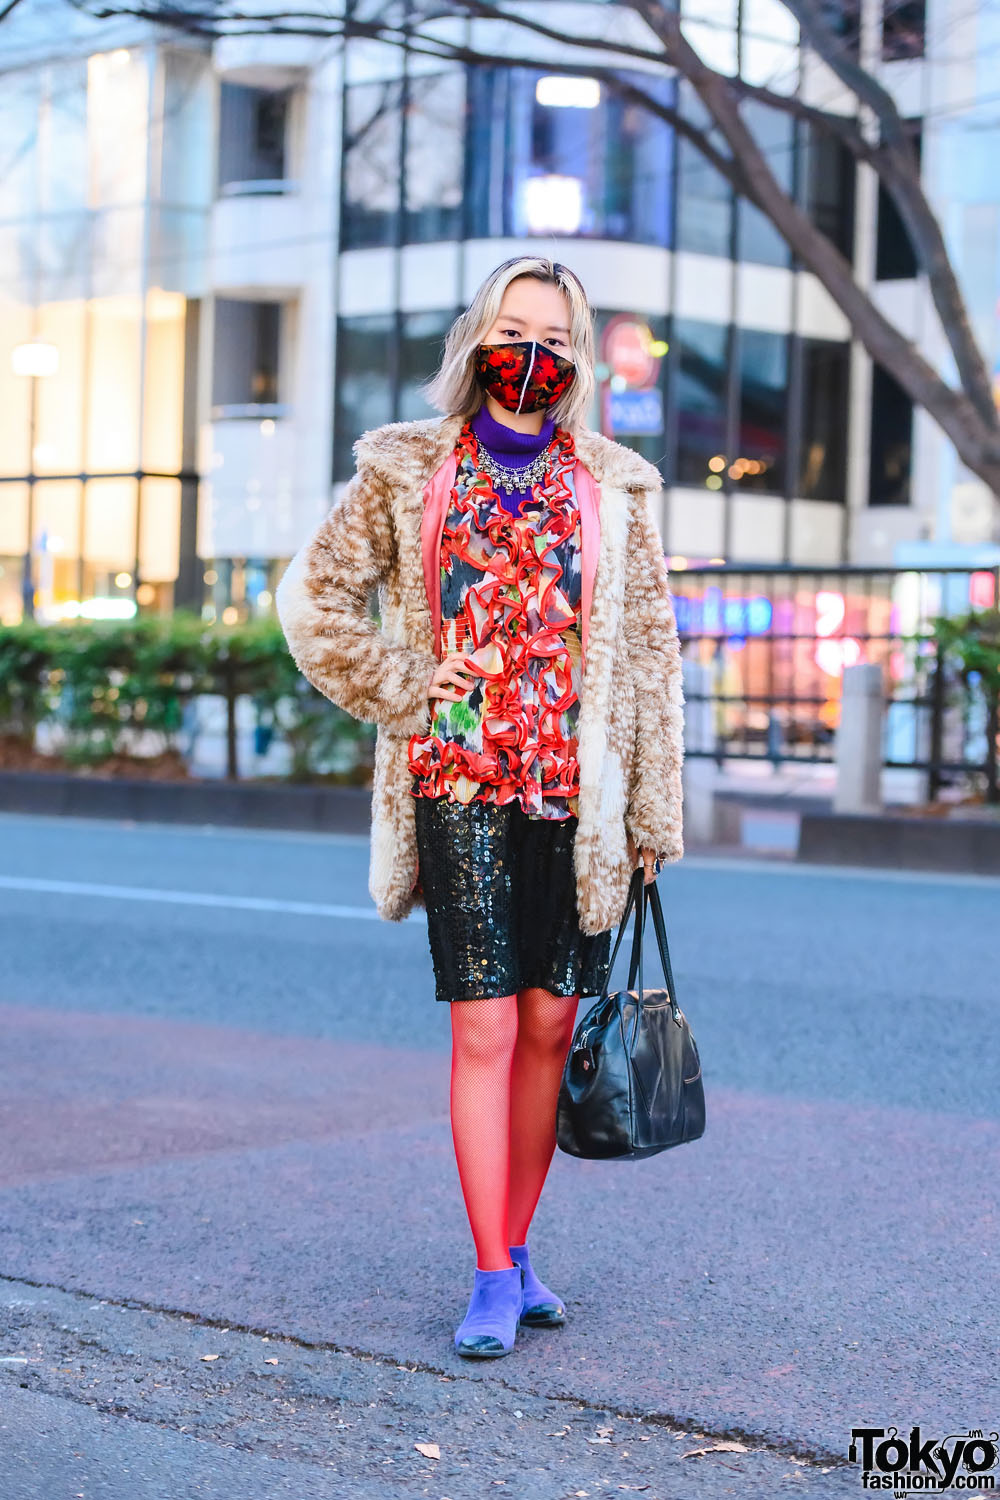 Fawn Faux Fur Jacket w/ Resale Mouse Ruffle Blouse, Sequin Skirt, Vivienne Westwood Bag, Statement Accessories, Red Fishnet Stockings & Diana Cap Toe Ankle Boots